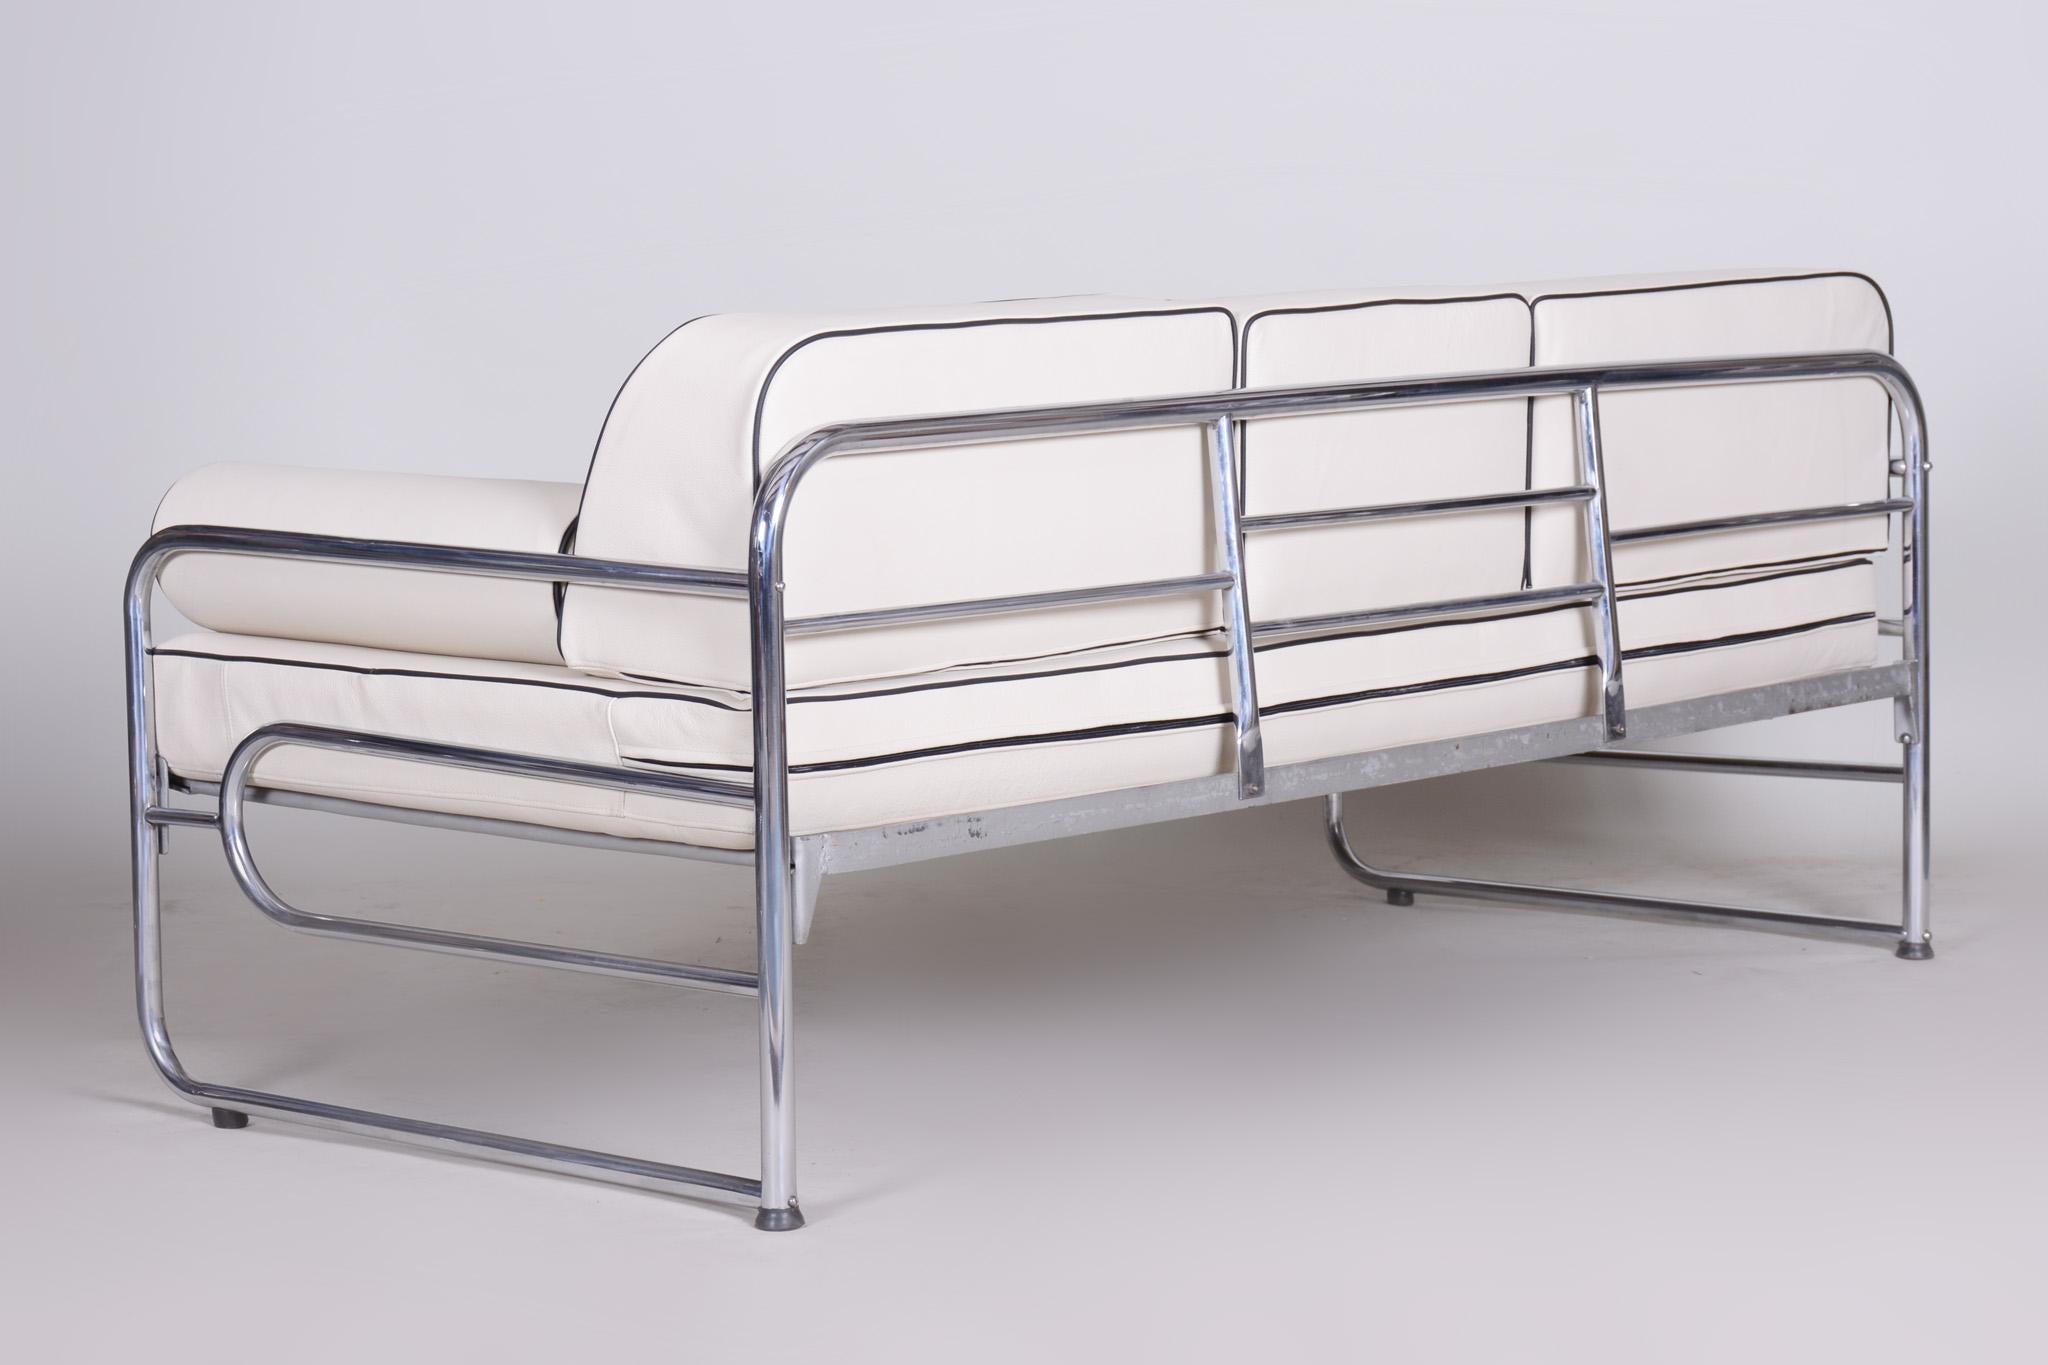 Bauhaus Ivory Tubular Chrom Sofa, Mücke-Melder, 1930s, High Quality Leather In Good Condition For Sale In Horomerice, CZ